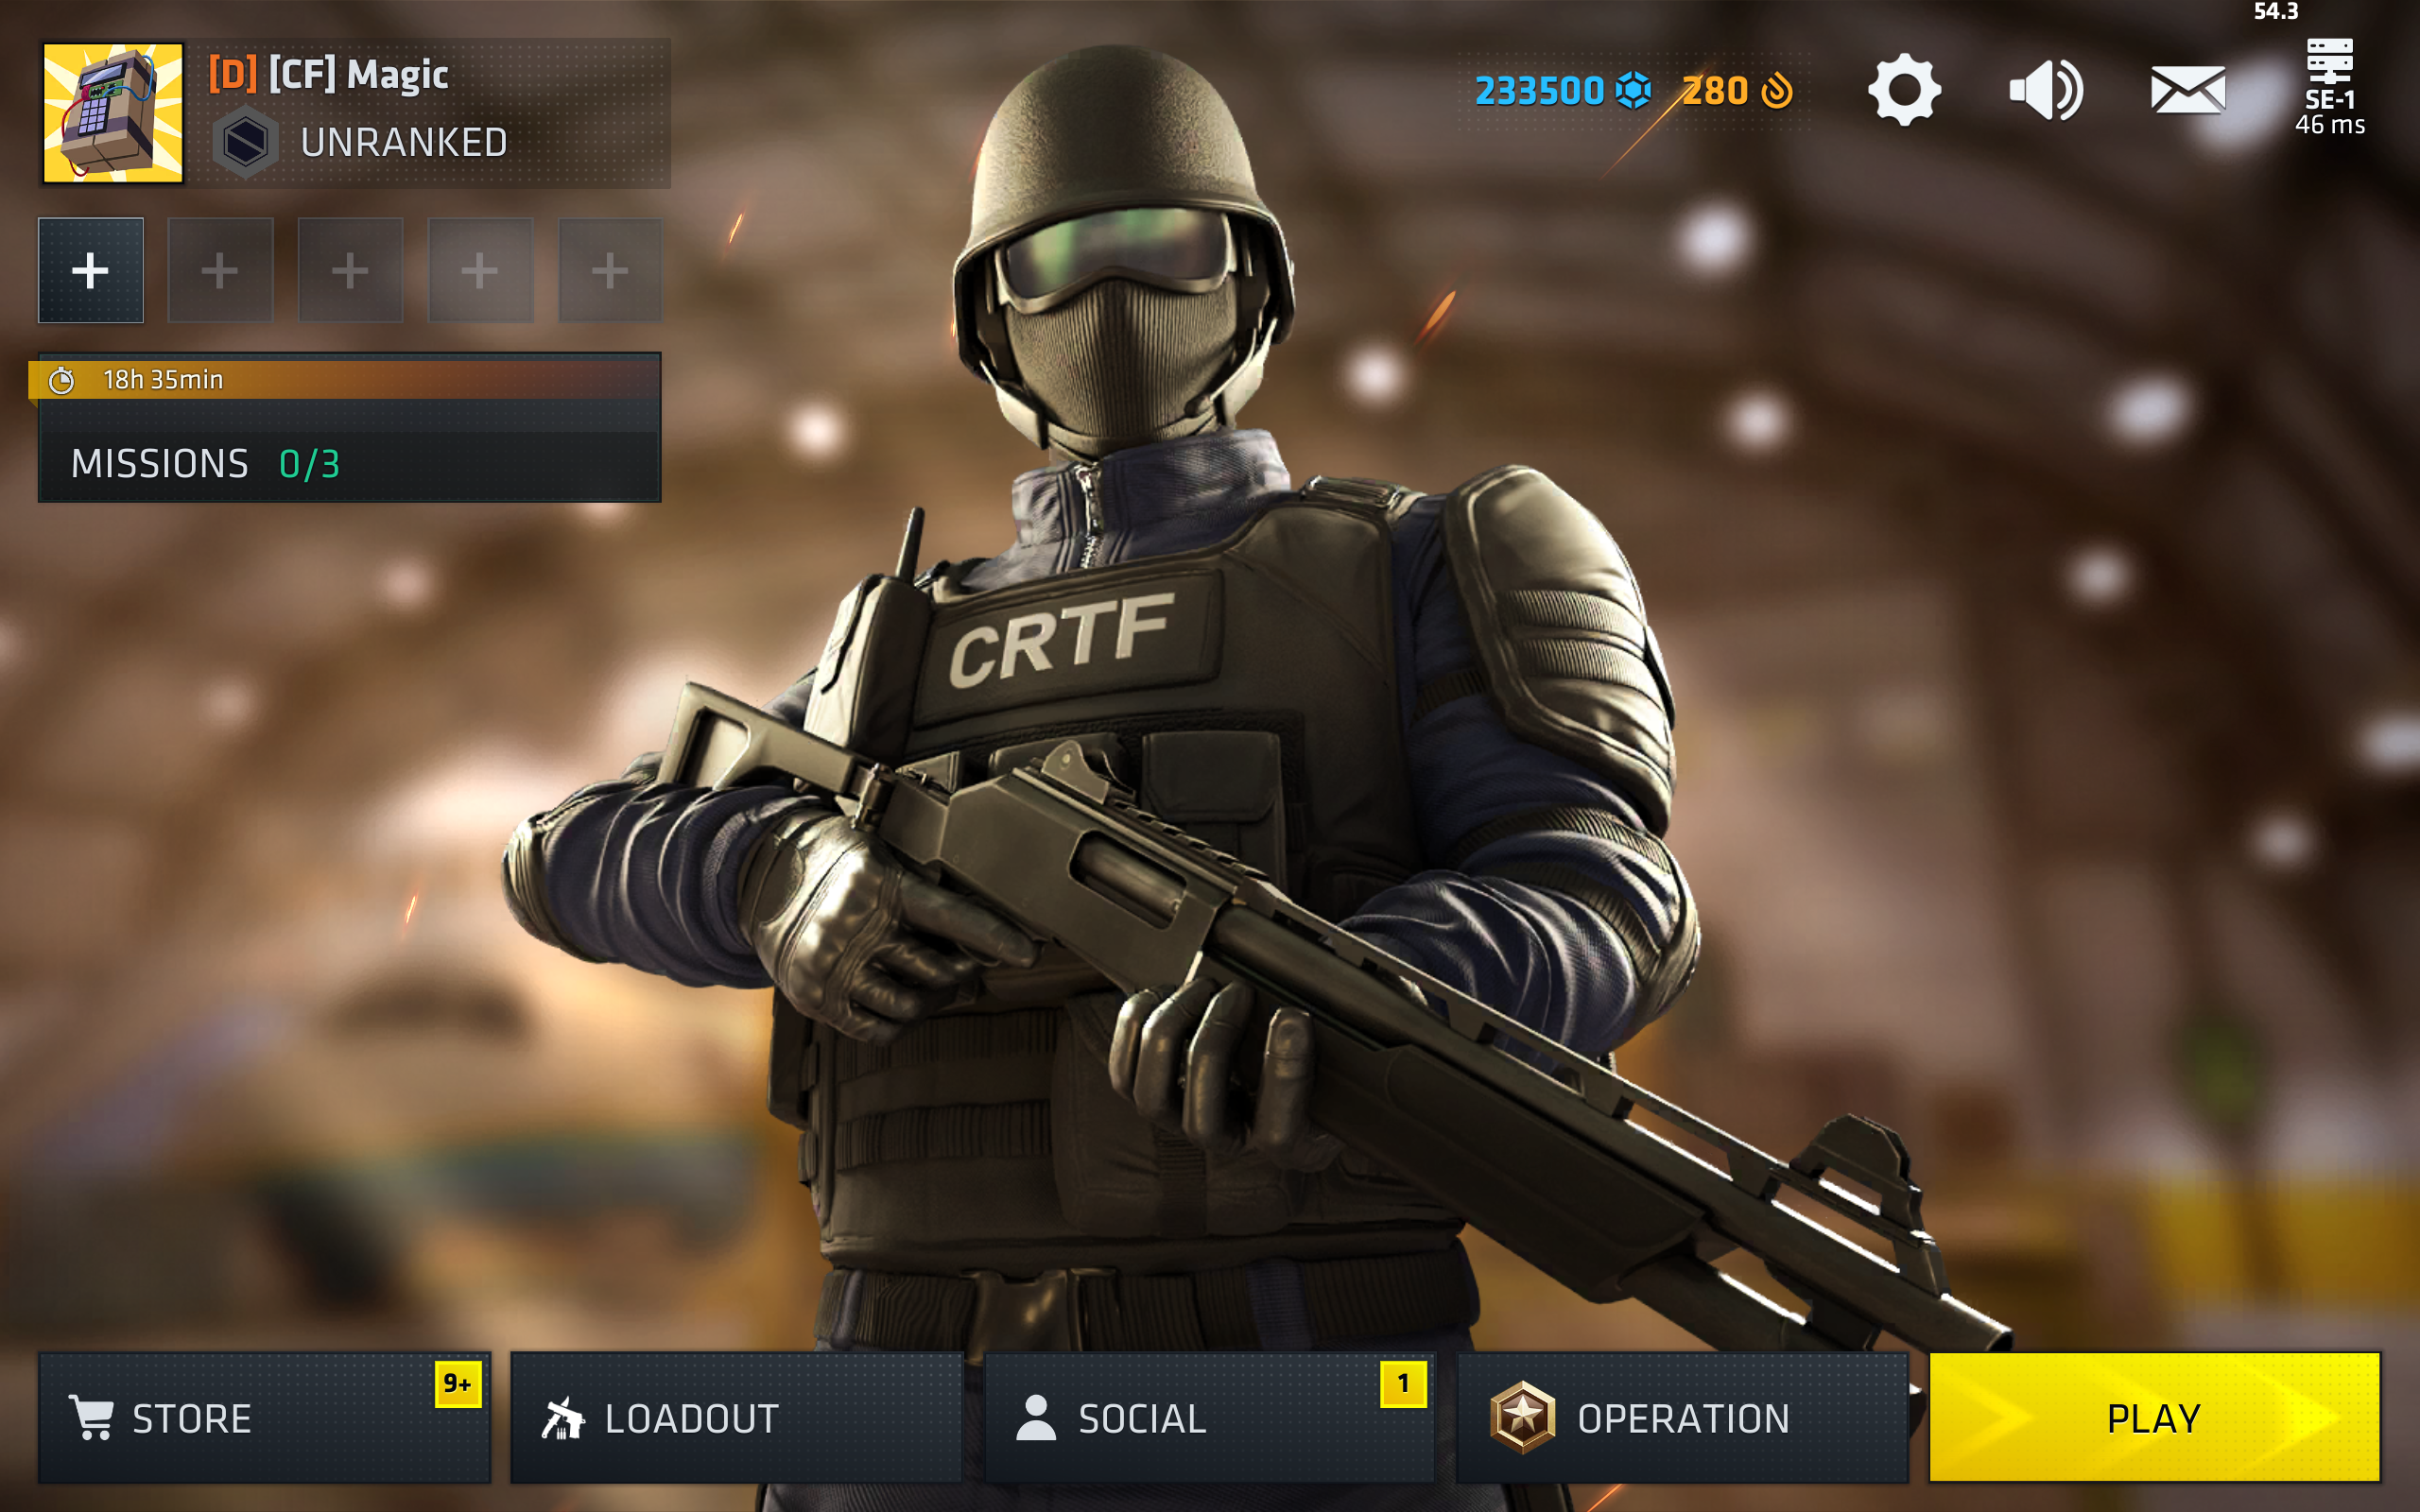 Stream Call of Duty Mobile Old Version APK: Enjoy the Classic FPS